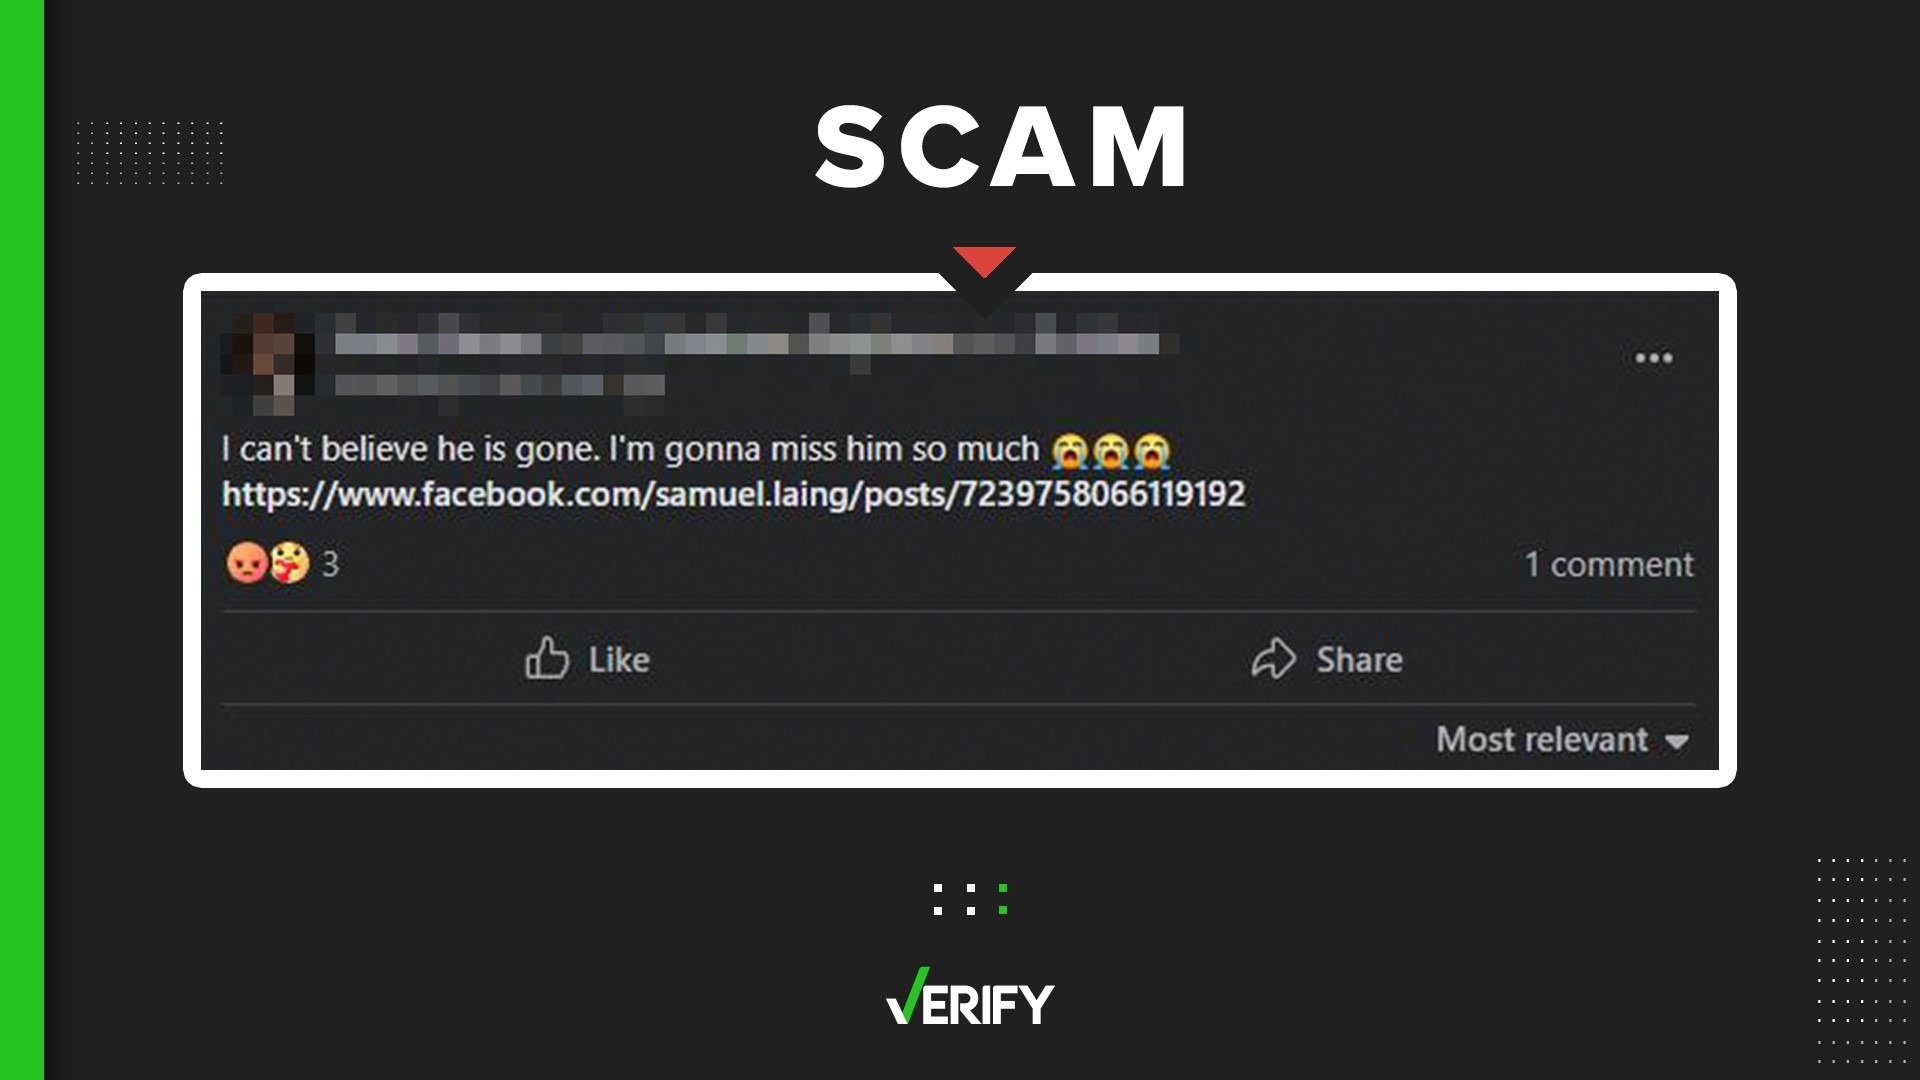 Scammers are using your friends’ Facebook accounts to spread malicious links disguised as Facebook posts or news articles about someone's death.